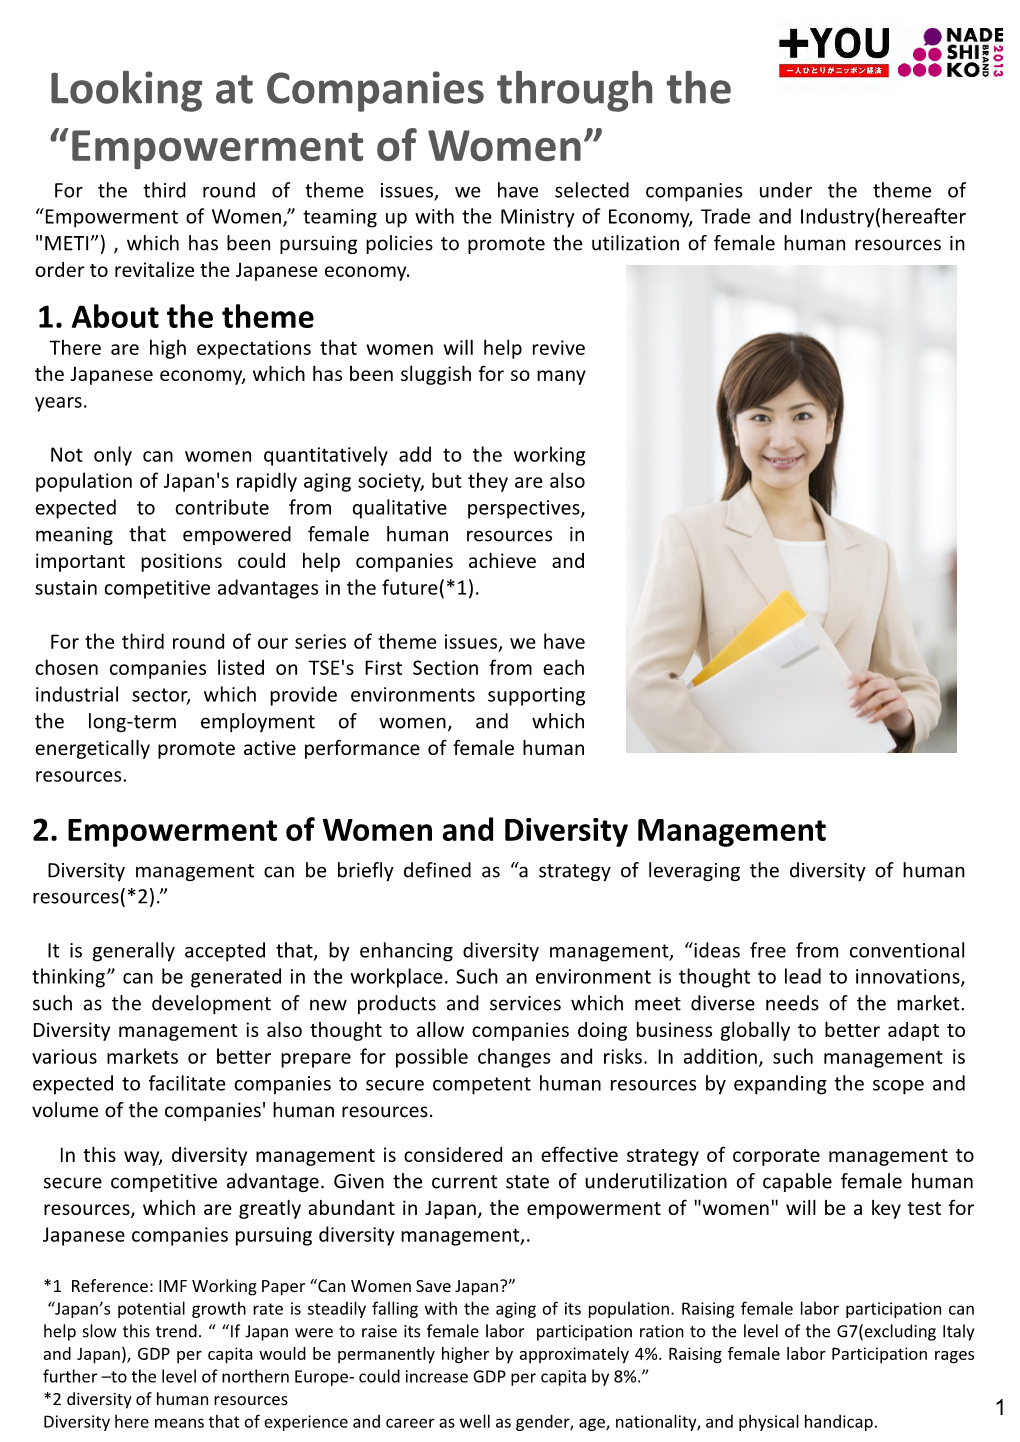 Looking at Companies Through the “Empowerment of Women”